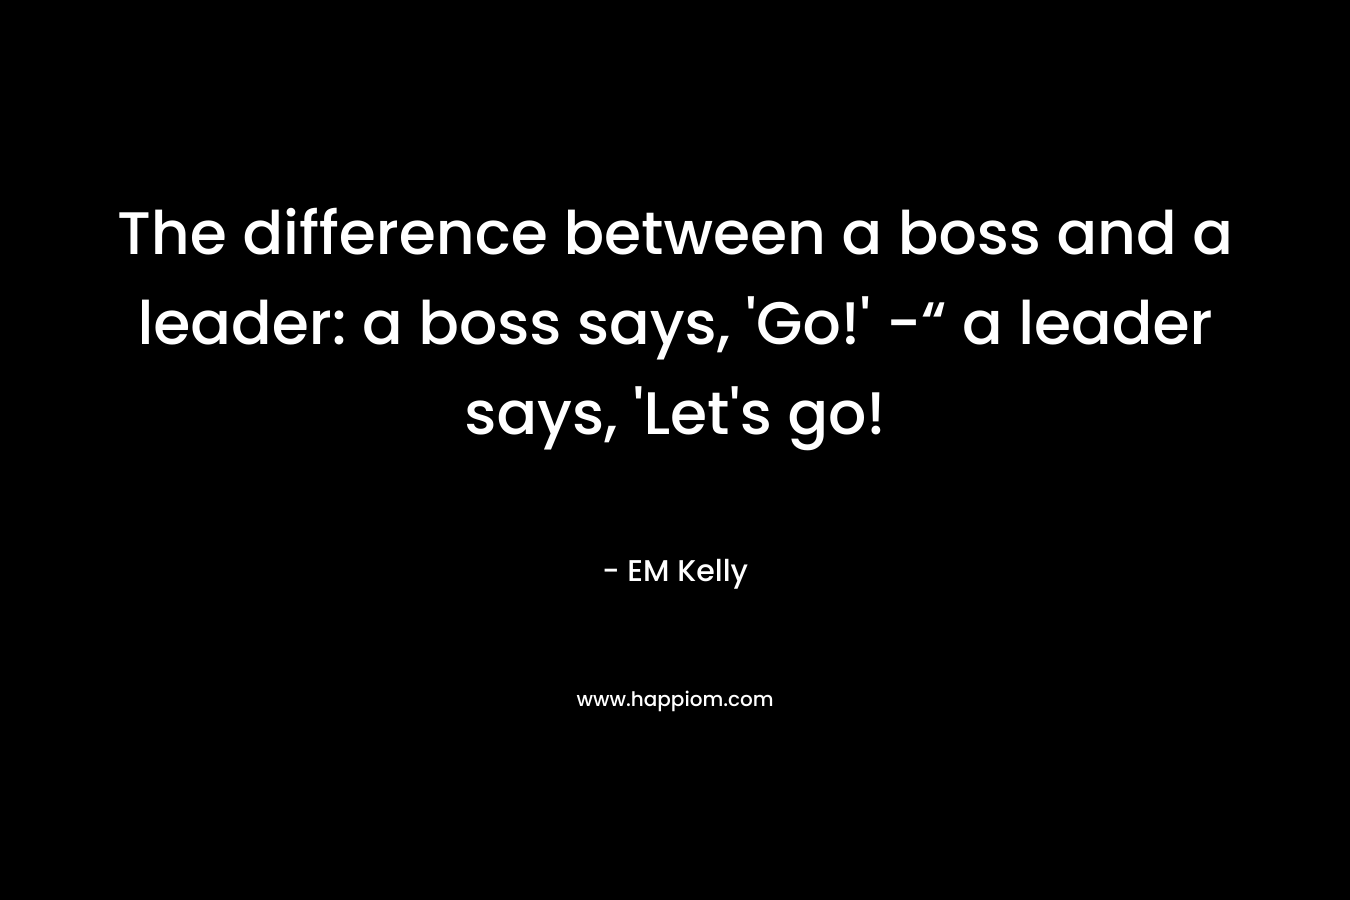 The difference between a boss and a leader: a boss says, 'Go!' -“ a leader says, 'Let's go!